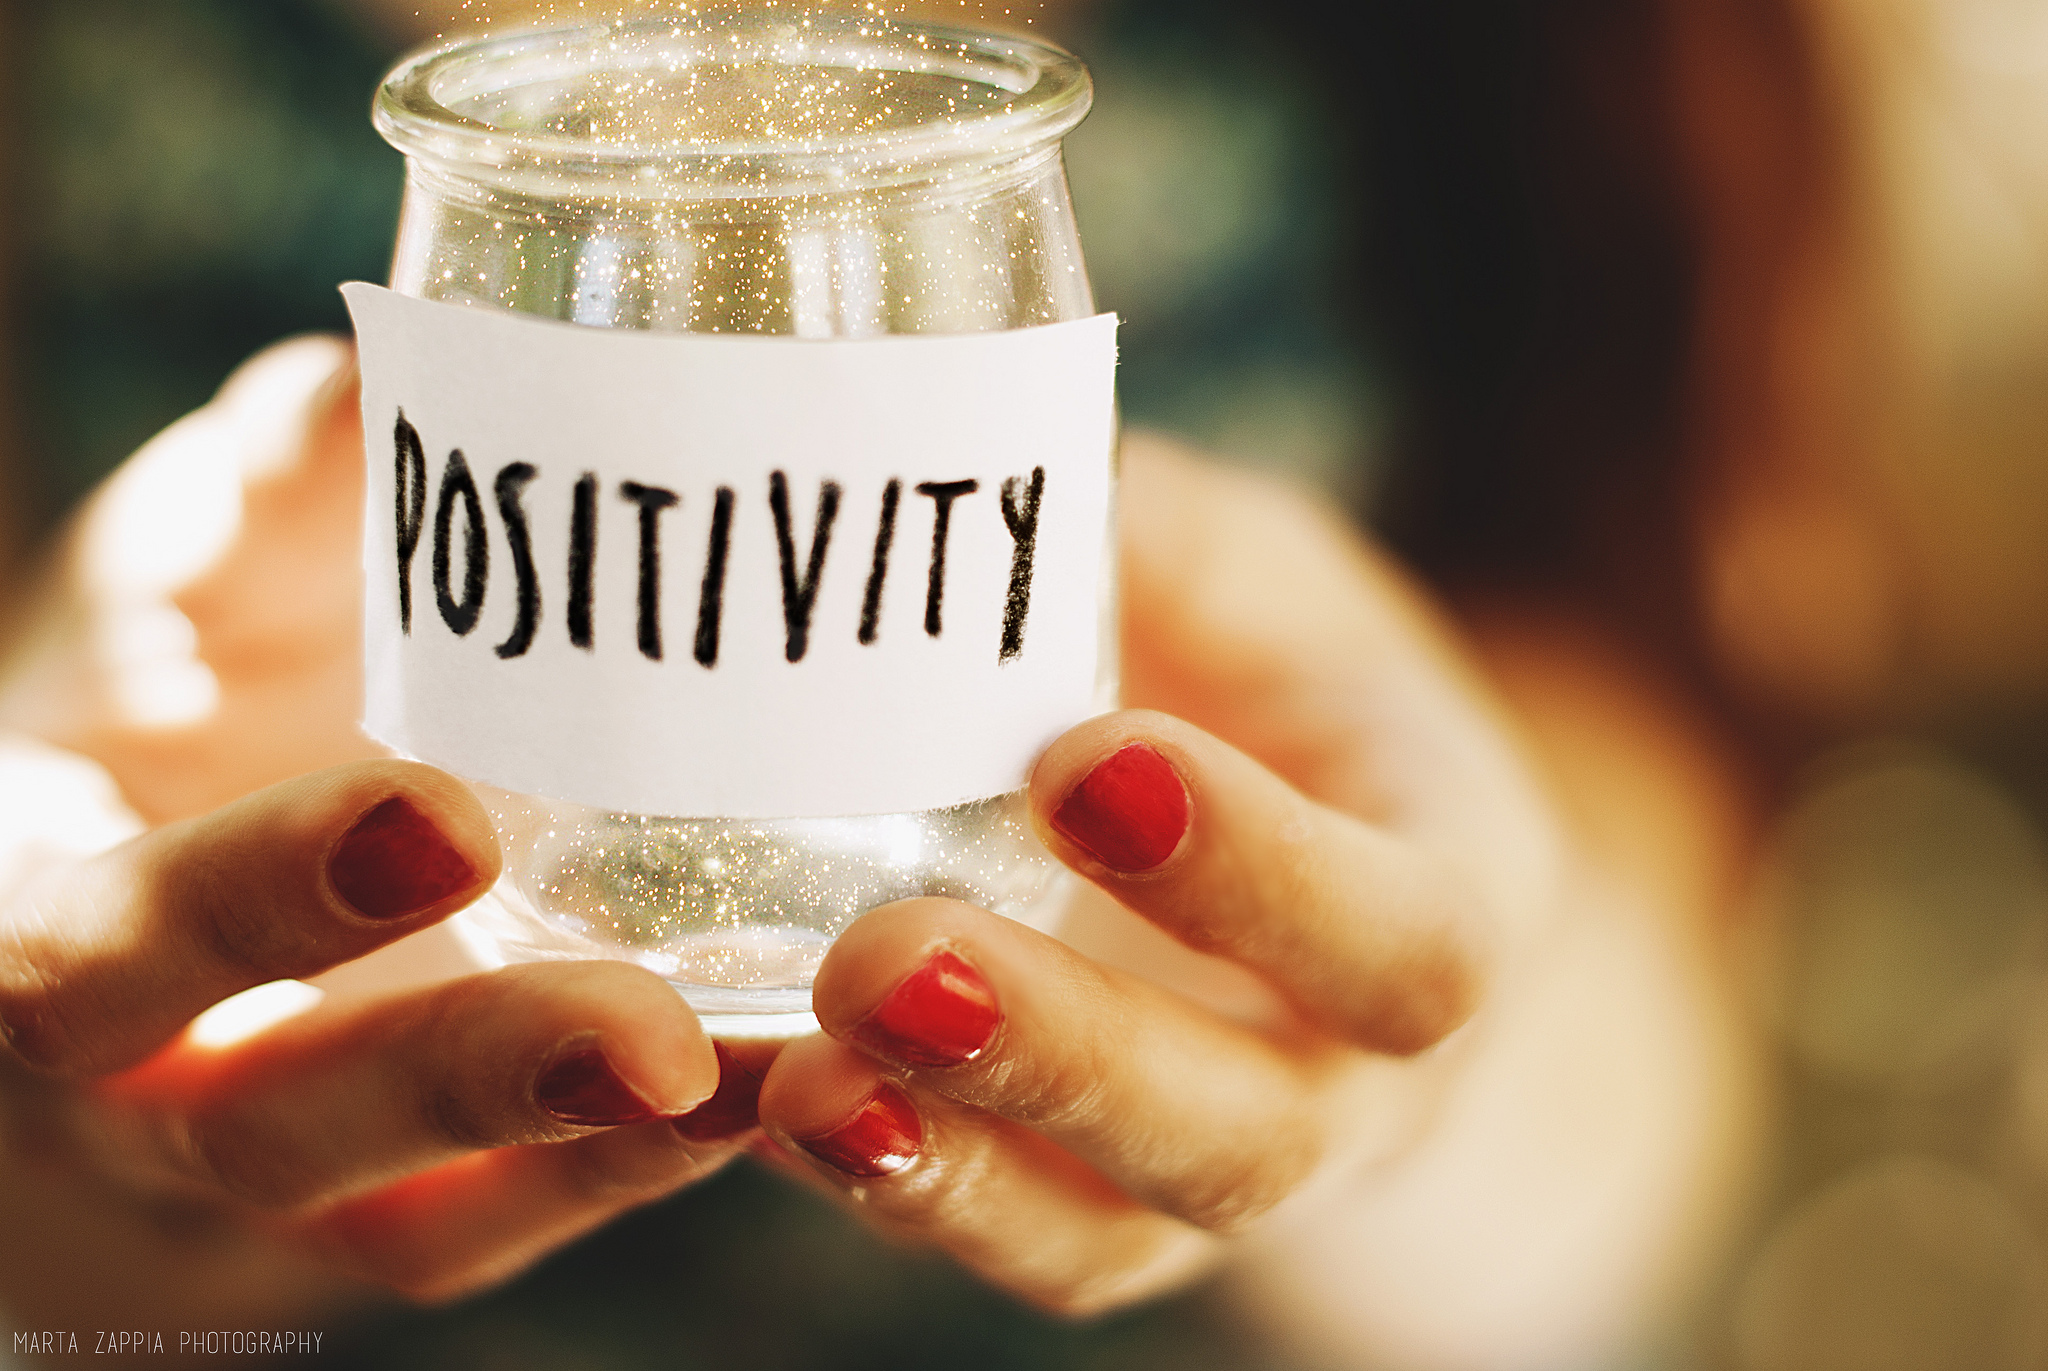 Get More Positivity In Your Life